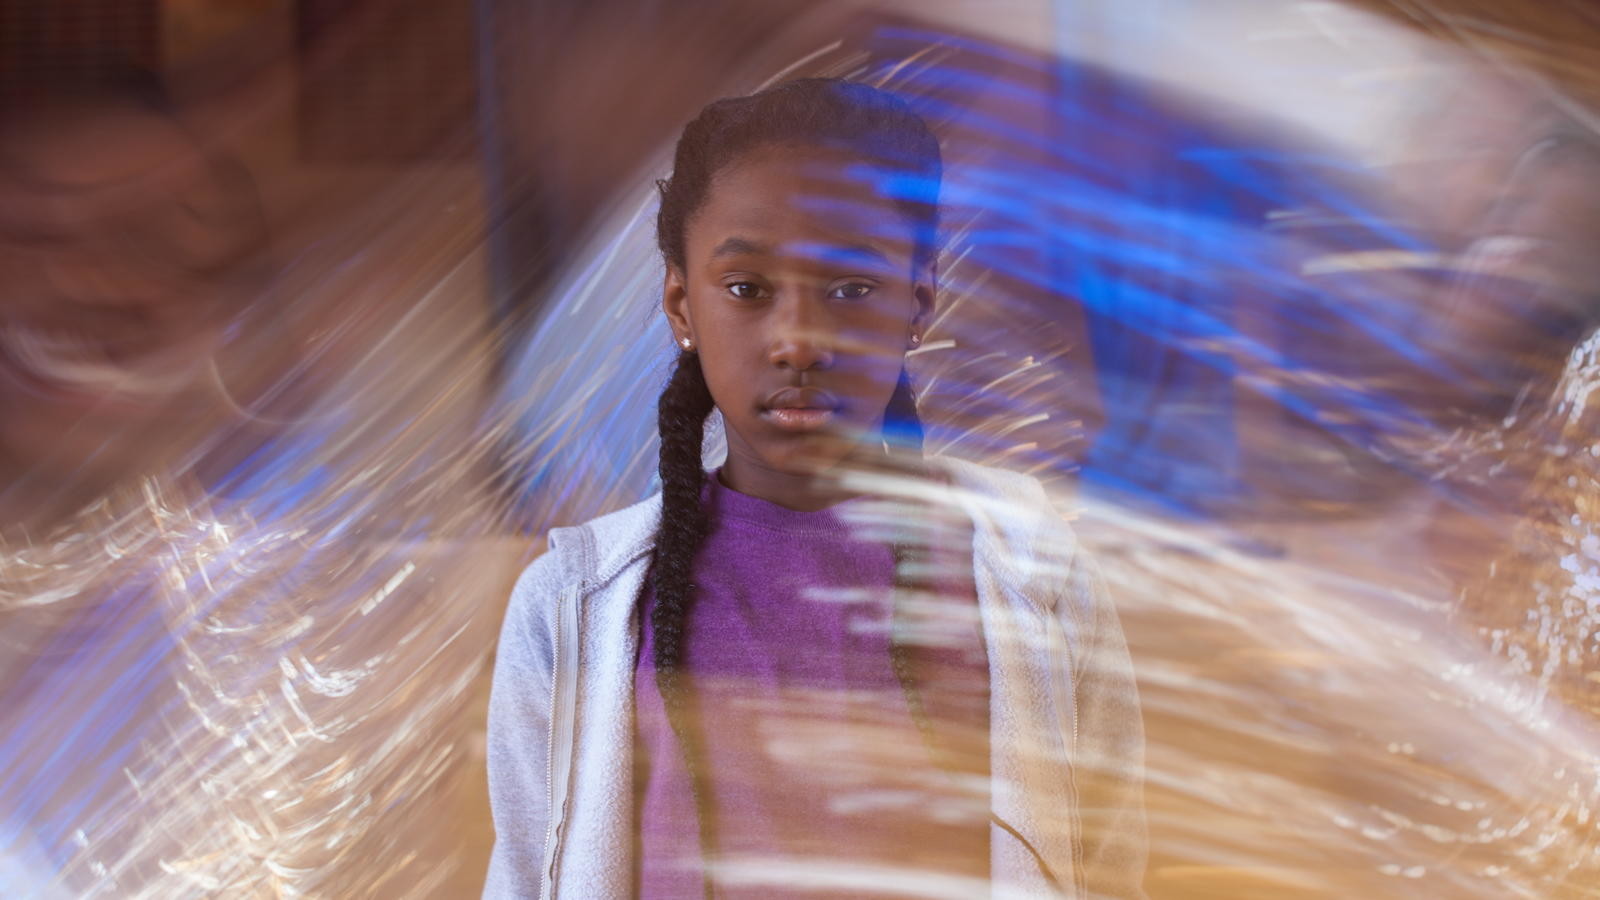 ‘The Fits’: A Coming-of-Age Story About Belonging and Identity